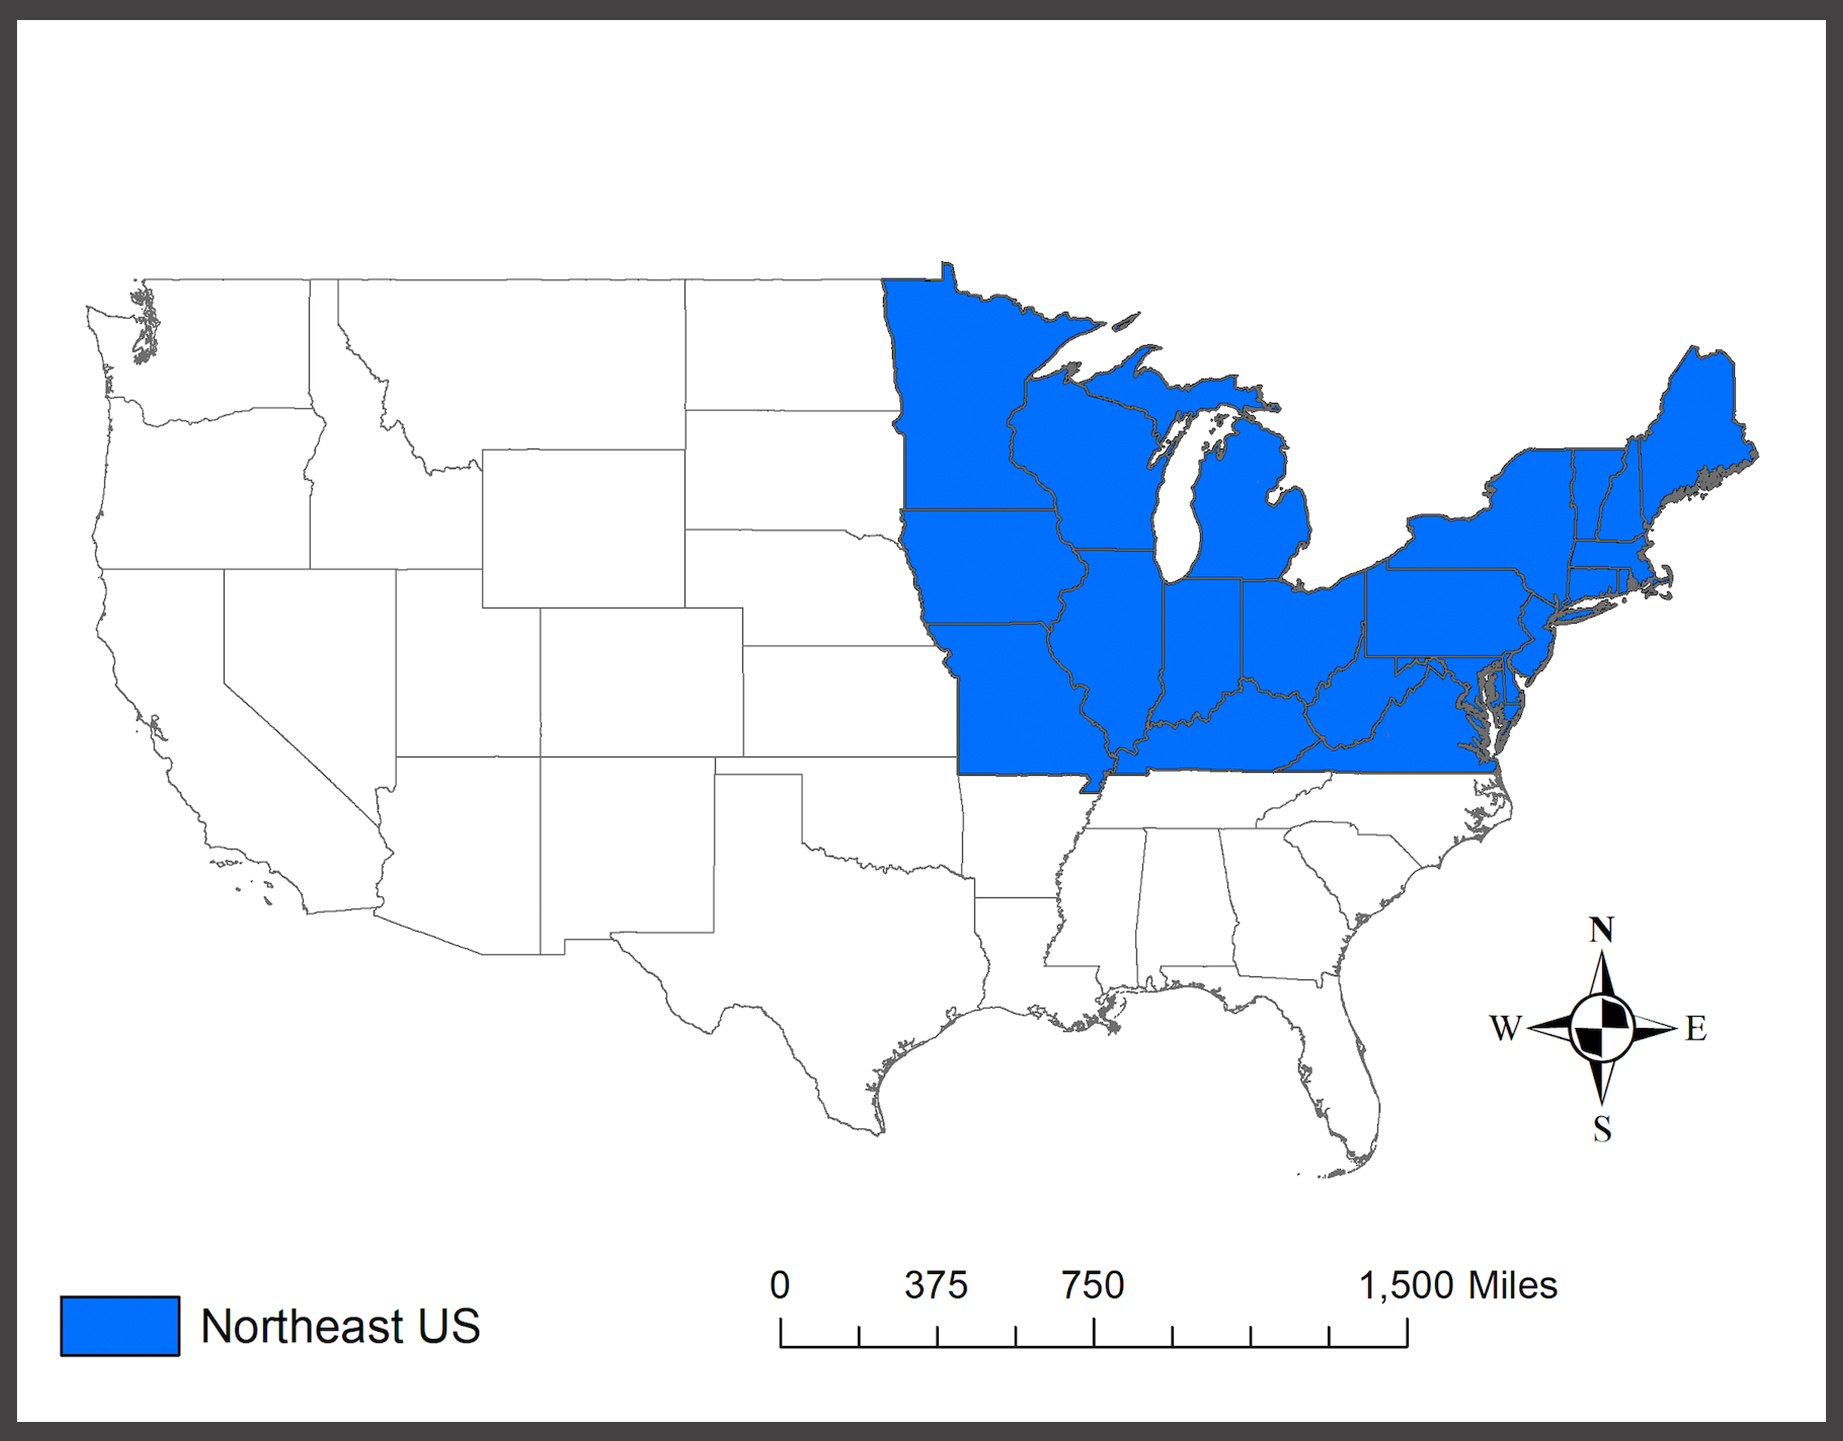 Map of contiential U.S. with states that are part of Hao Yu's research colored in blue